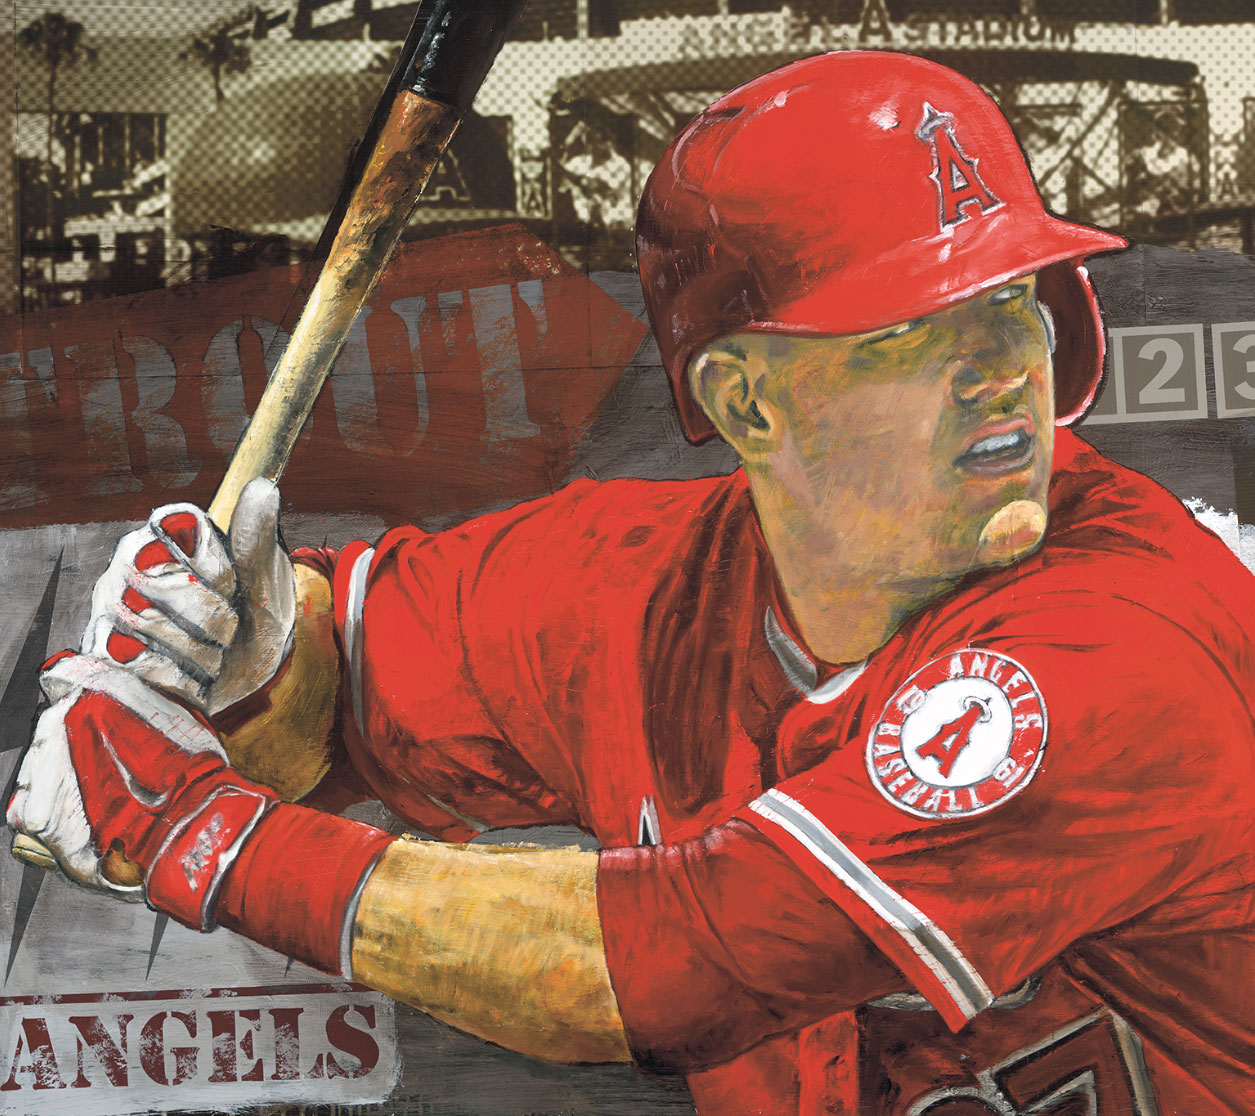 Los Angeles Angels of Anaheim by Stephen Holland